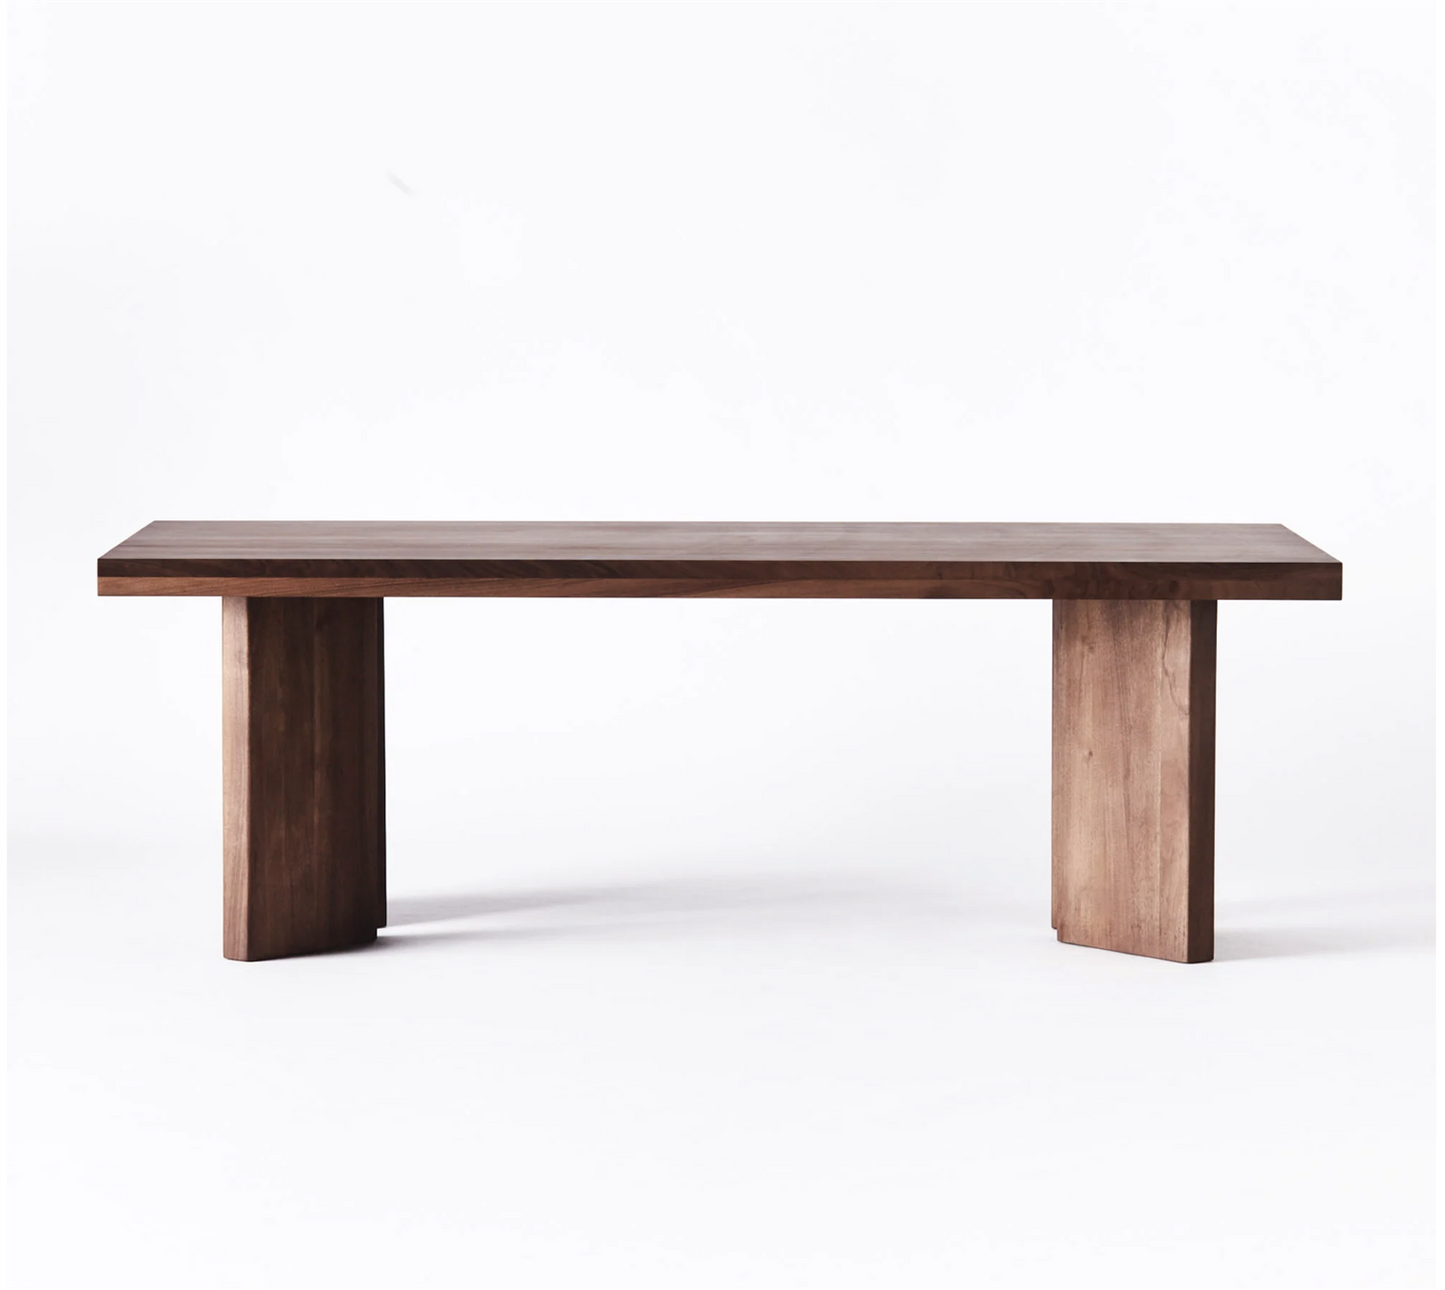 FRENCH DINING TABLE WALNUT 100-220 cm